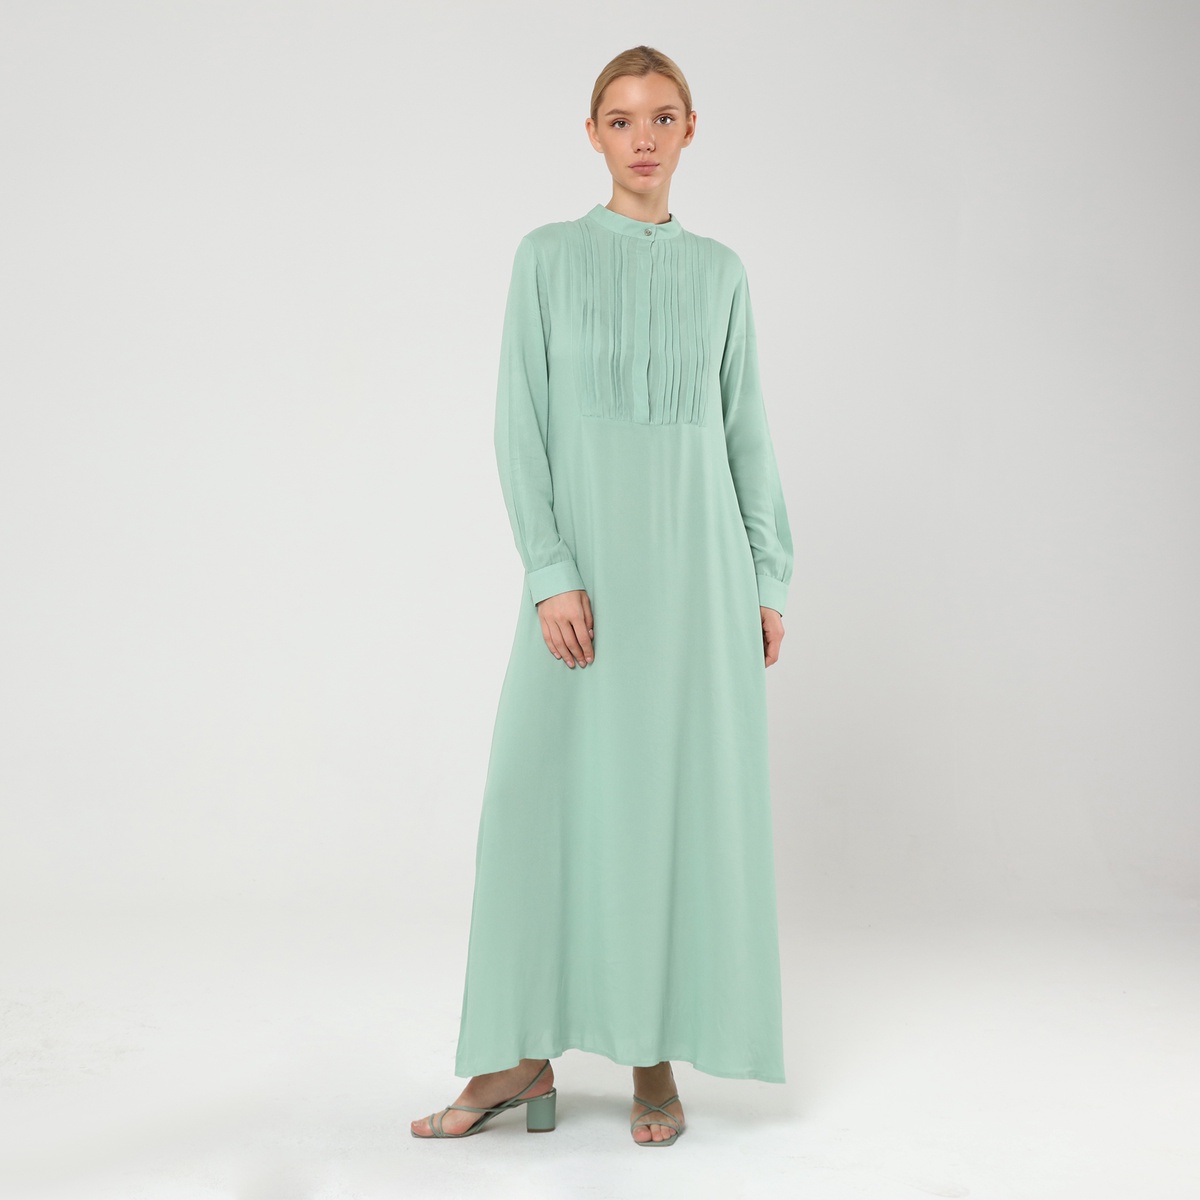 Embracing Elegance: Long Maxi Dresses for Young Girls